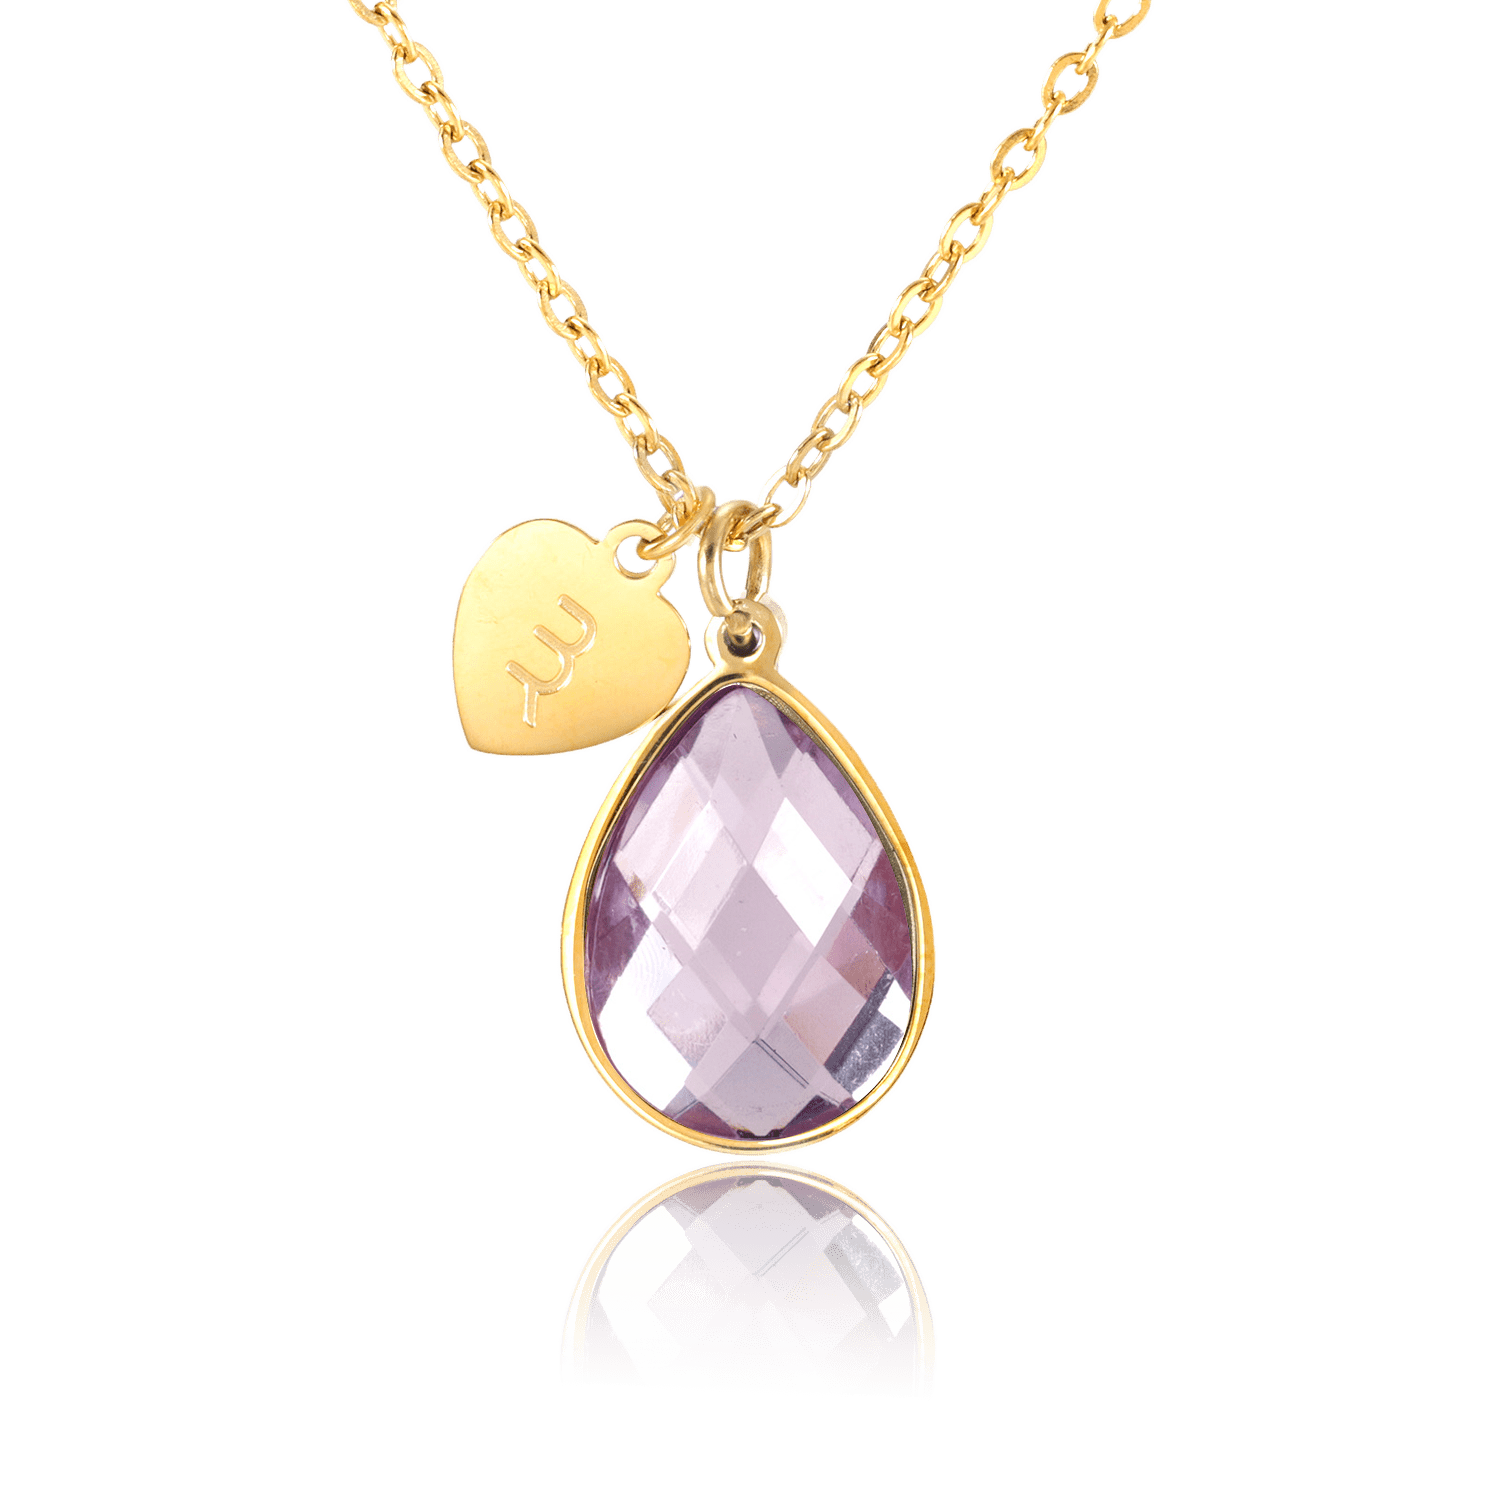 bianco rosso Necklaces Gold August Birthstone - Alexandrite cyprus greece jewelry gift free shipping europe worldwide